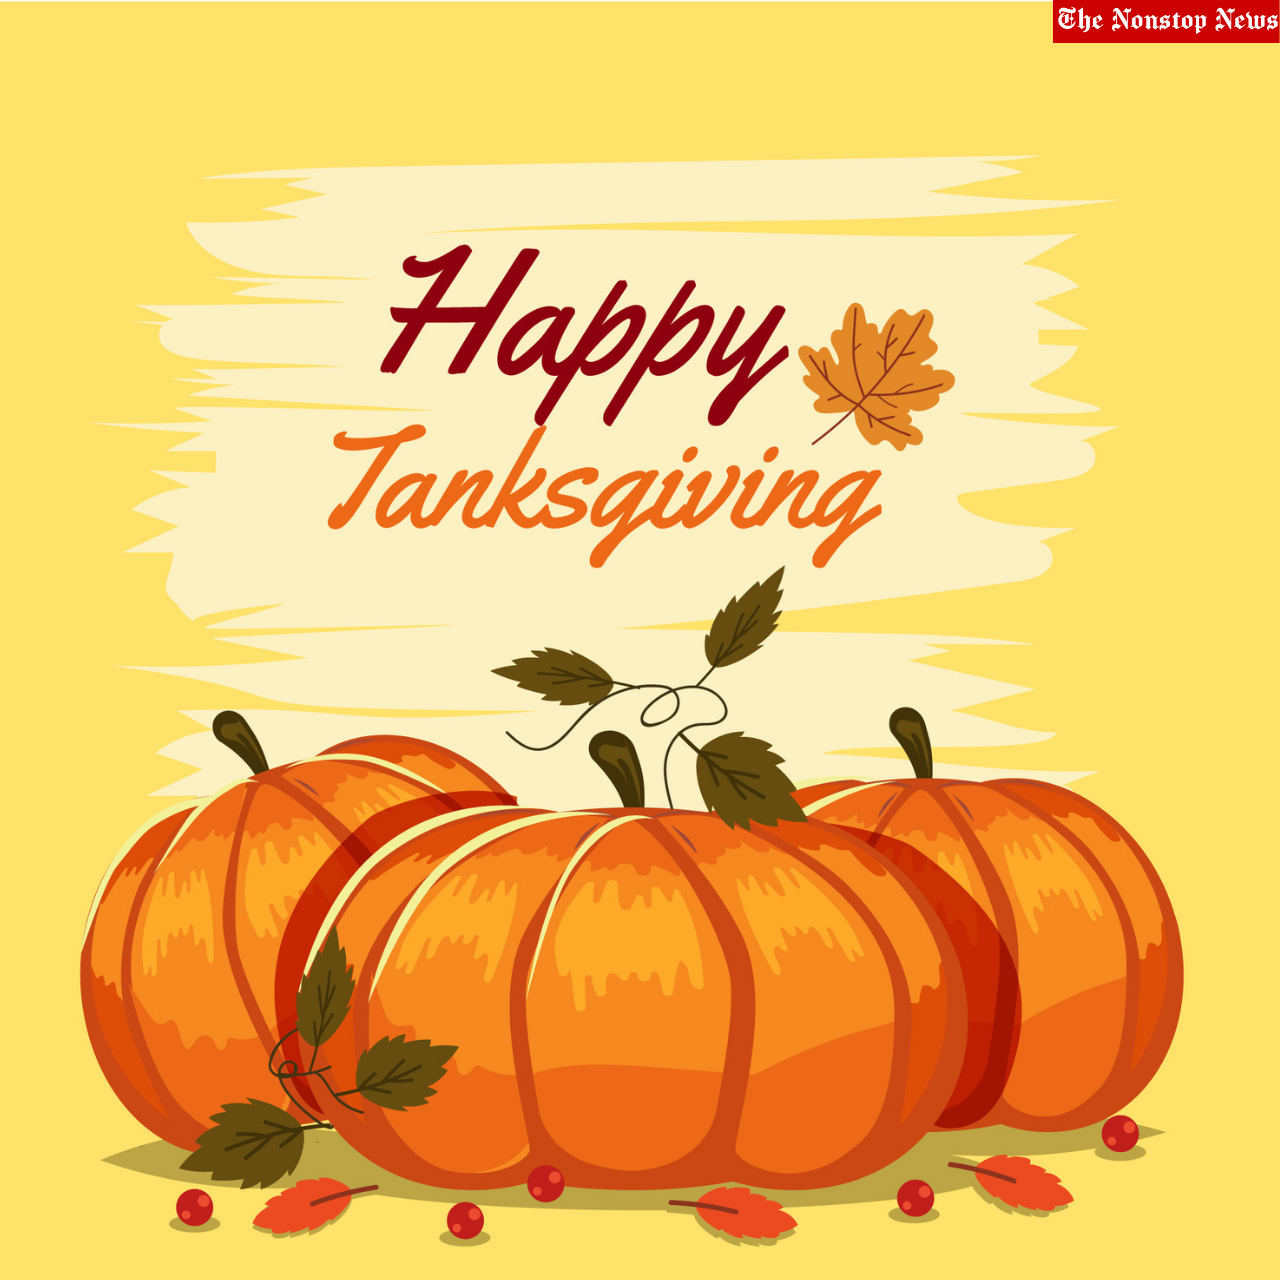 Thanksgiving 2021 WhatsApp Status Video to Download for Free